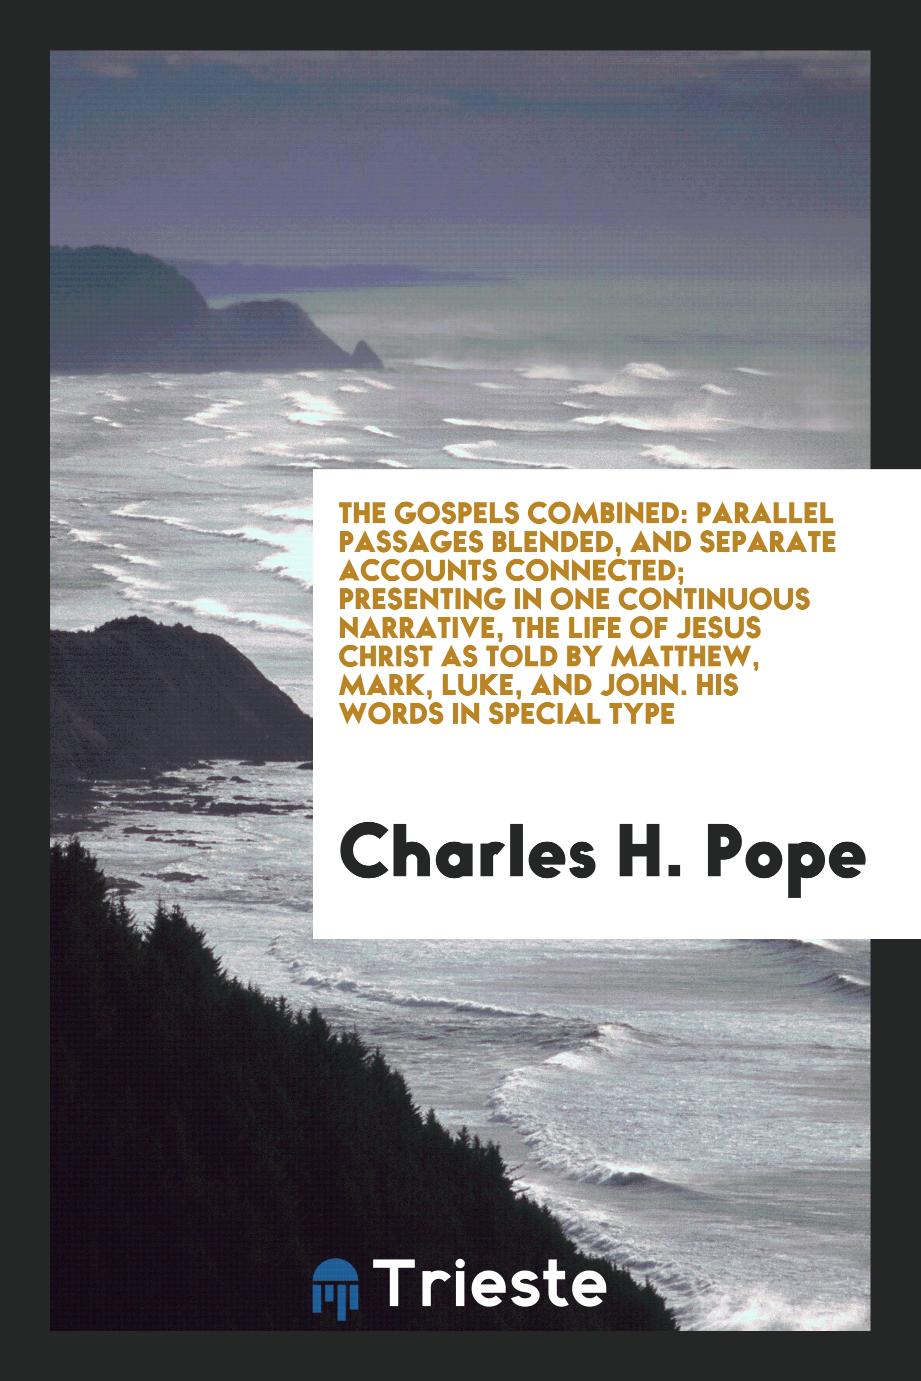 The Gospels Combined: Parallel Passages Blended, and Separate Accounts Connected; Presenting in One Continuous Narrative, the Life of Jesus Christ as Told by Matthew, Mark, Luke, and John. His Words in Special Type